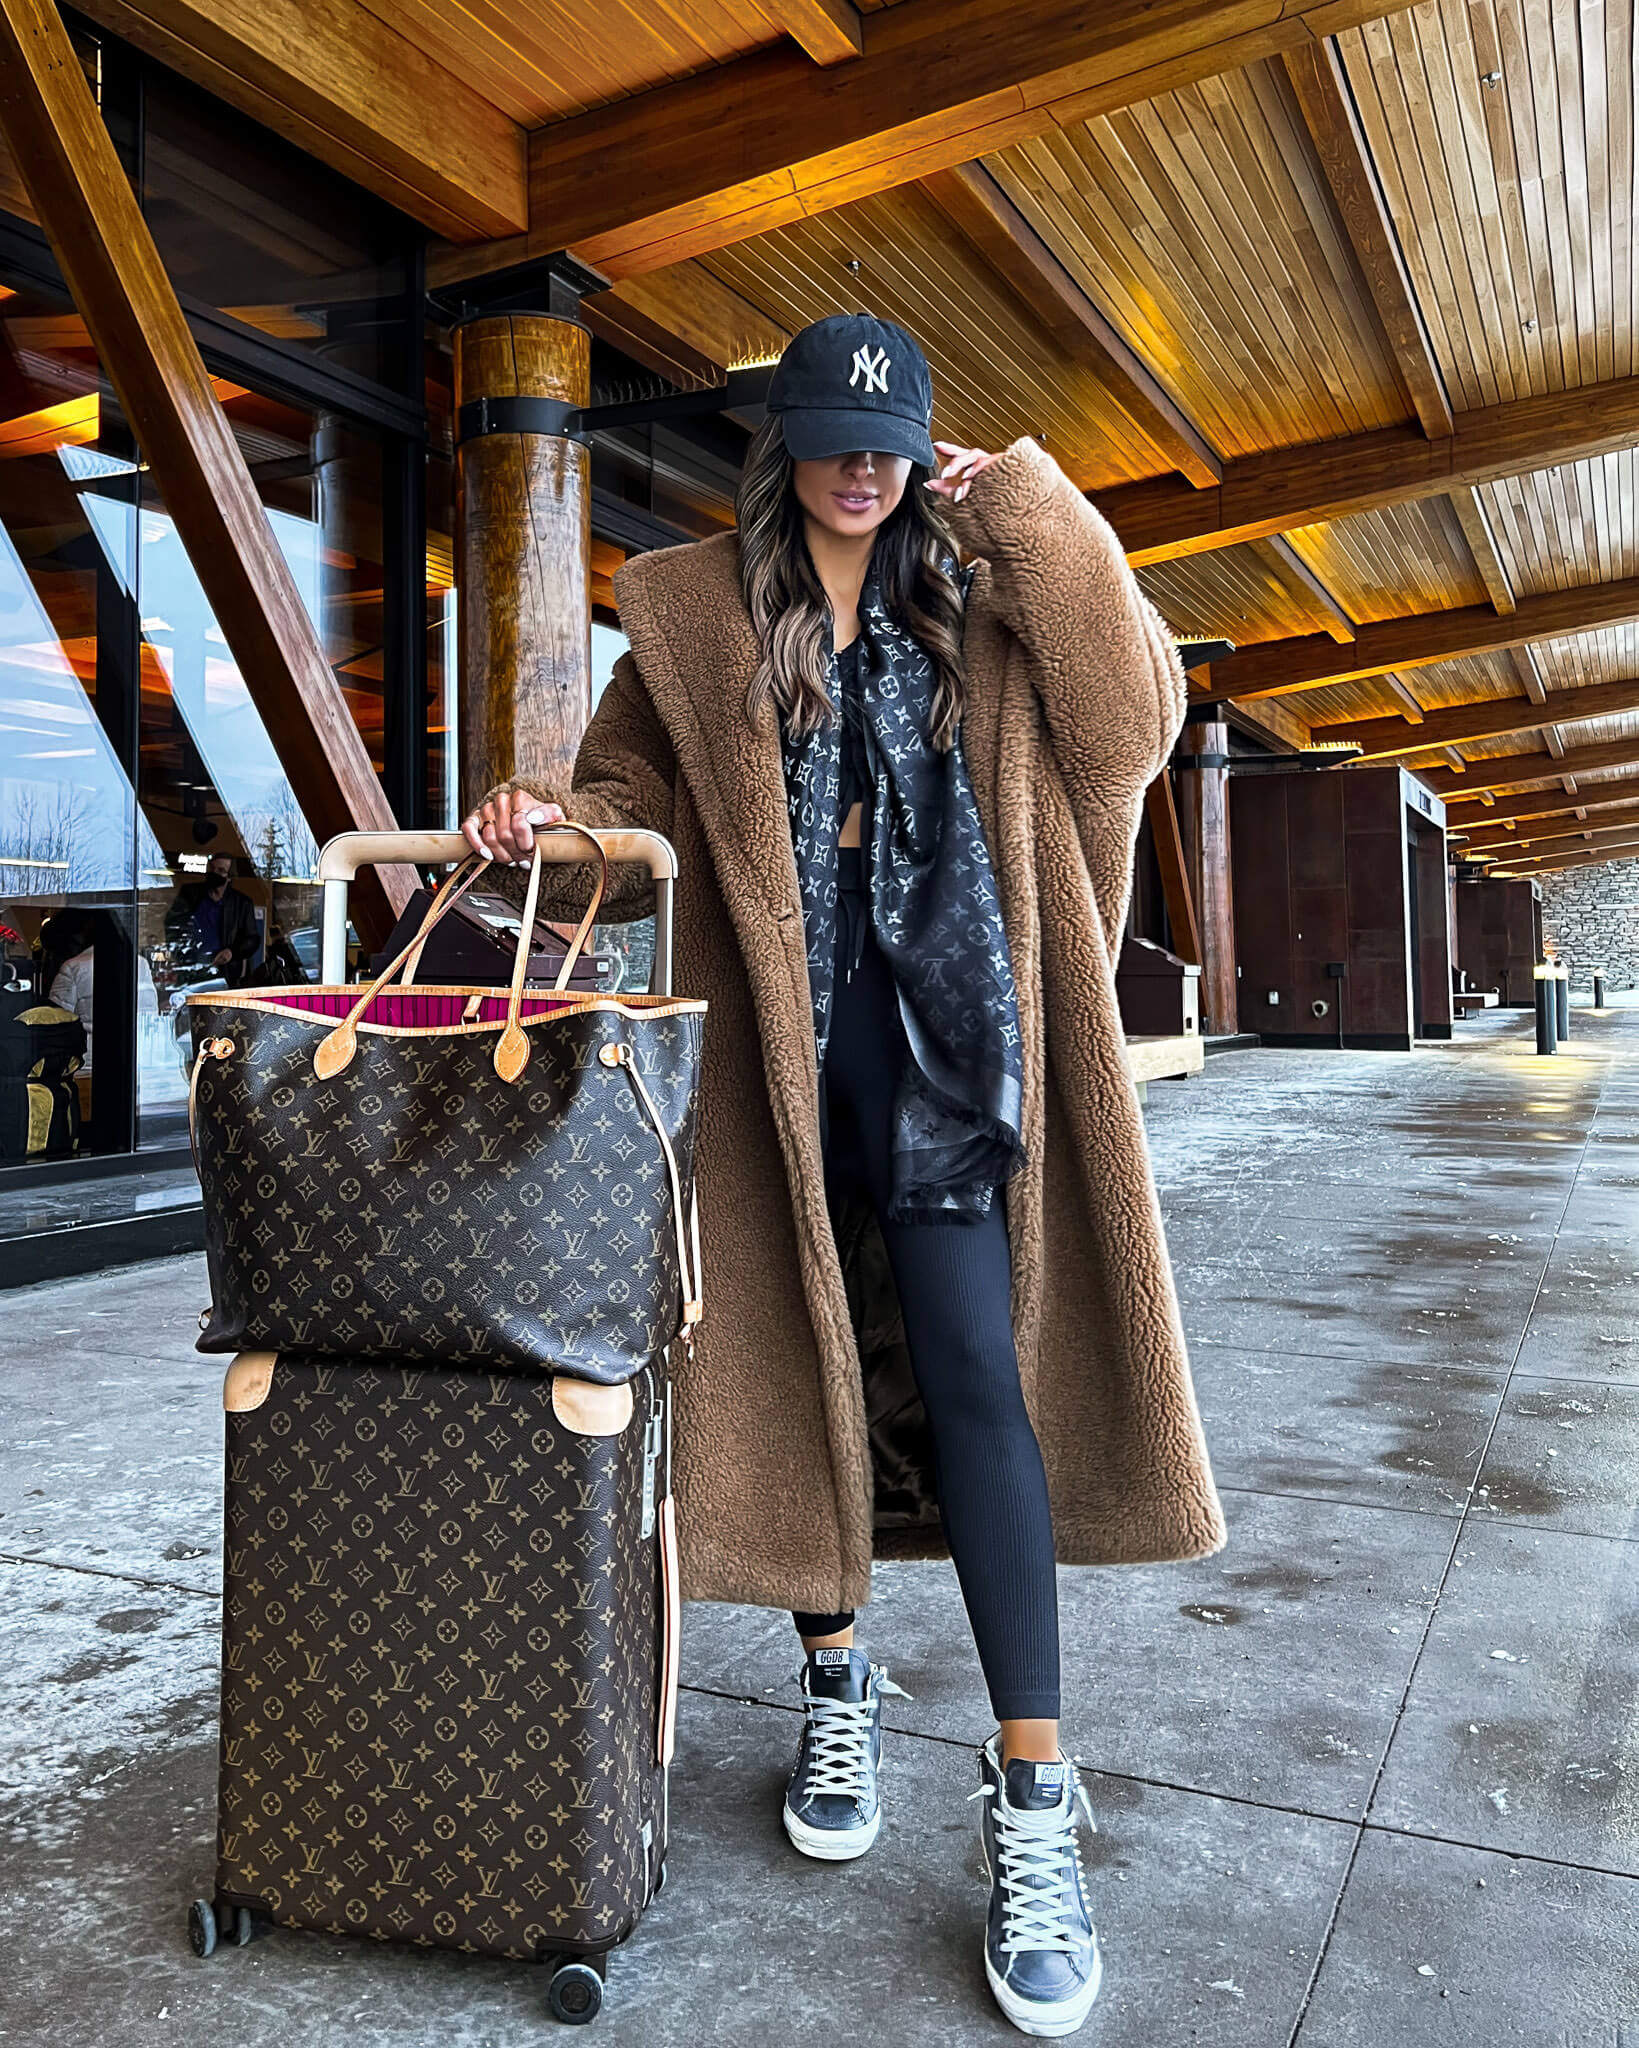 Travel outfit, airport outfit, fashion, cozy, comfy, simple, cool, pretty,  trend